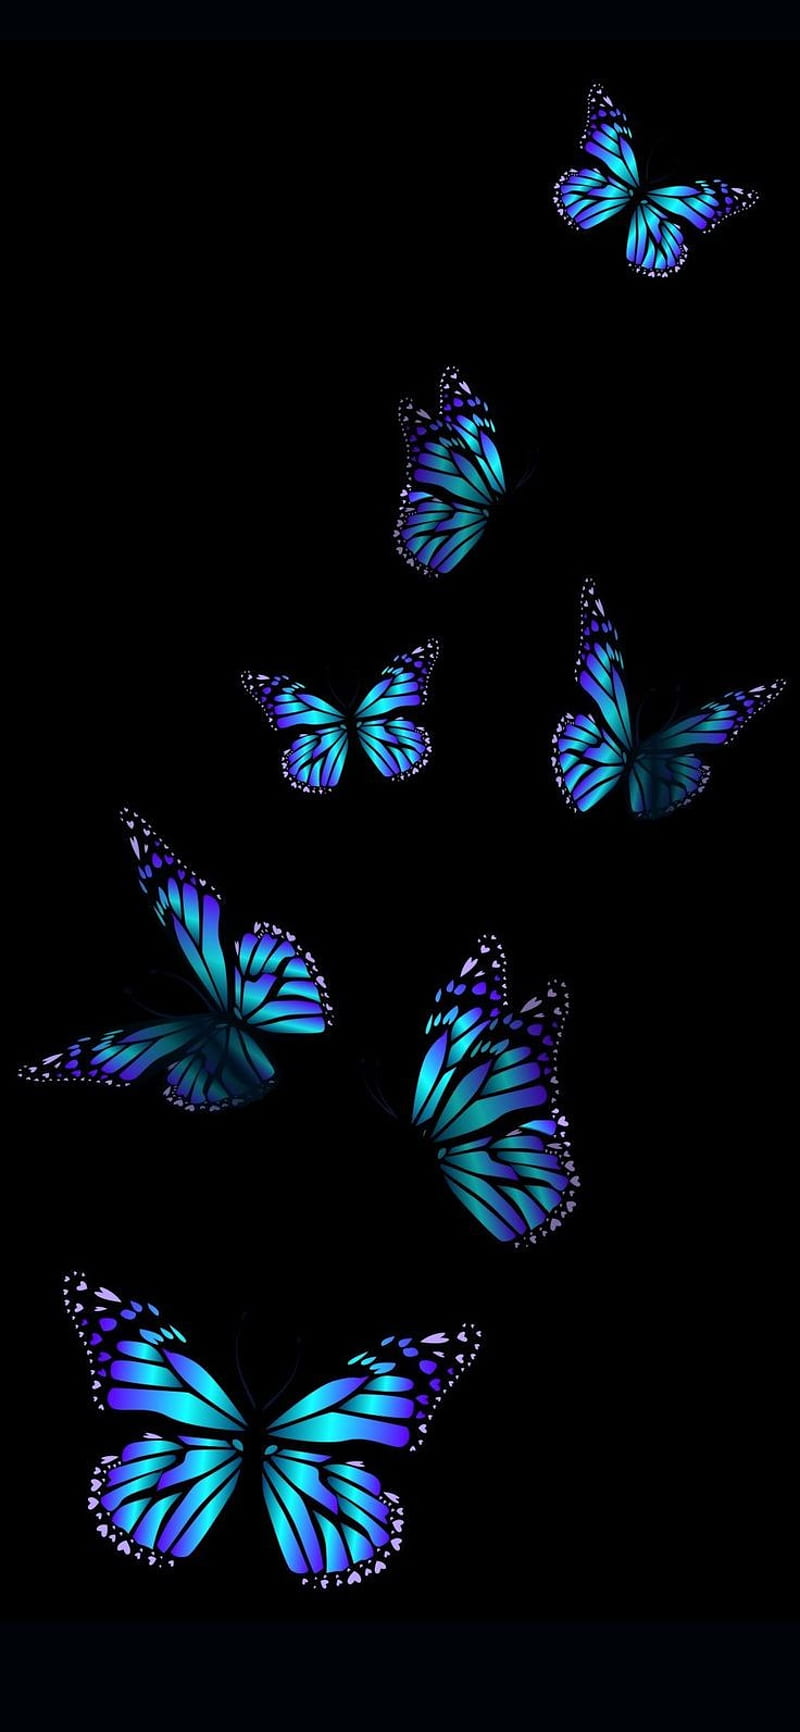 Download Cute Neon Butterfly With Dark Background Wallpaper Image For Free  Download  Pngtree